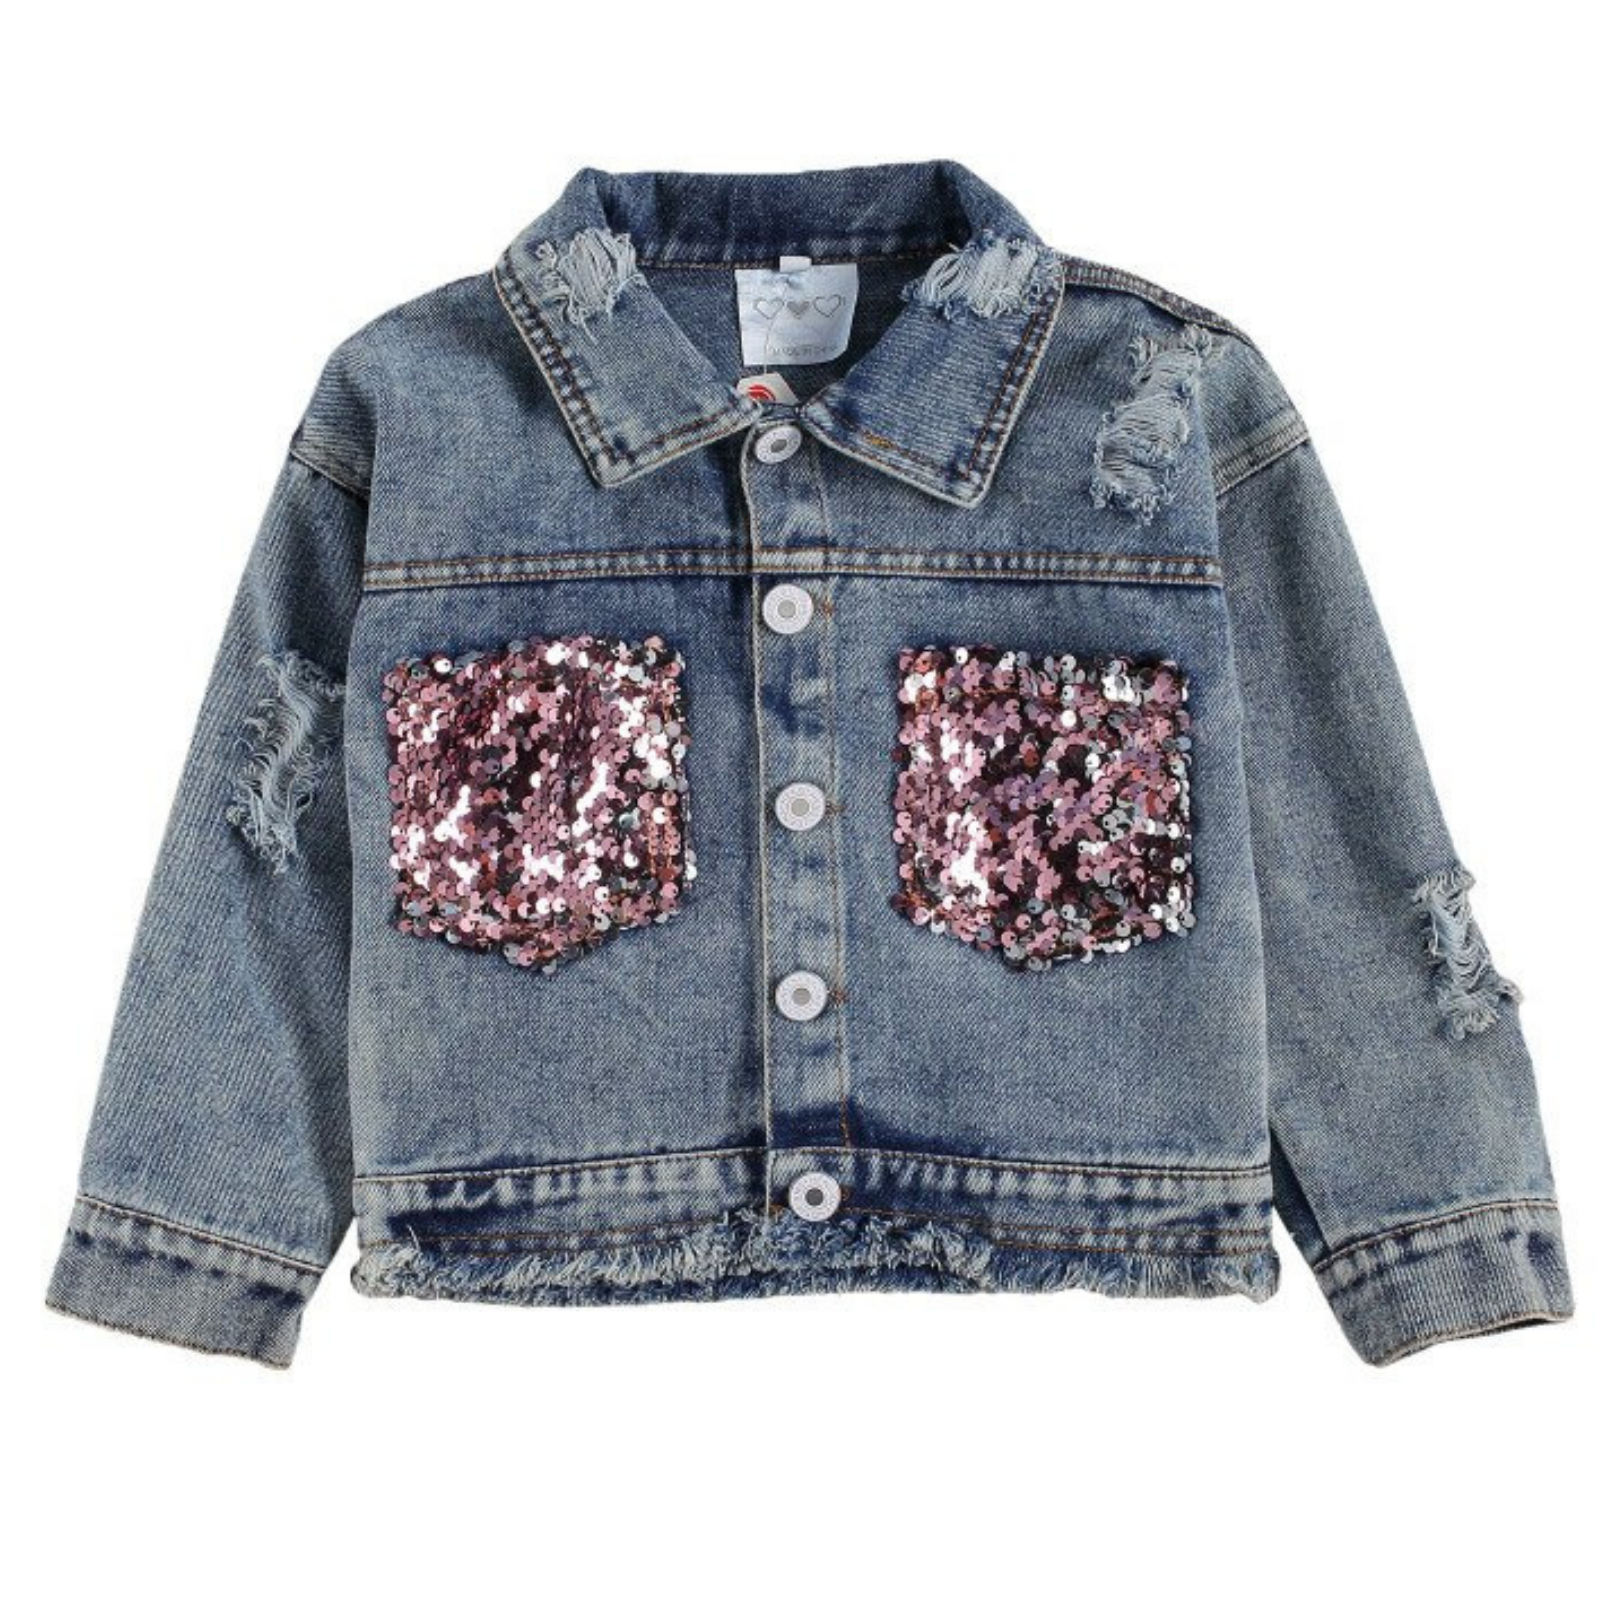 Sequin Ripped Jacket